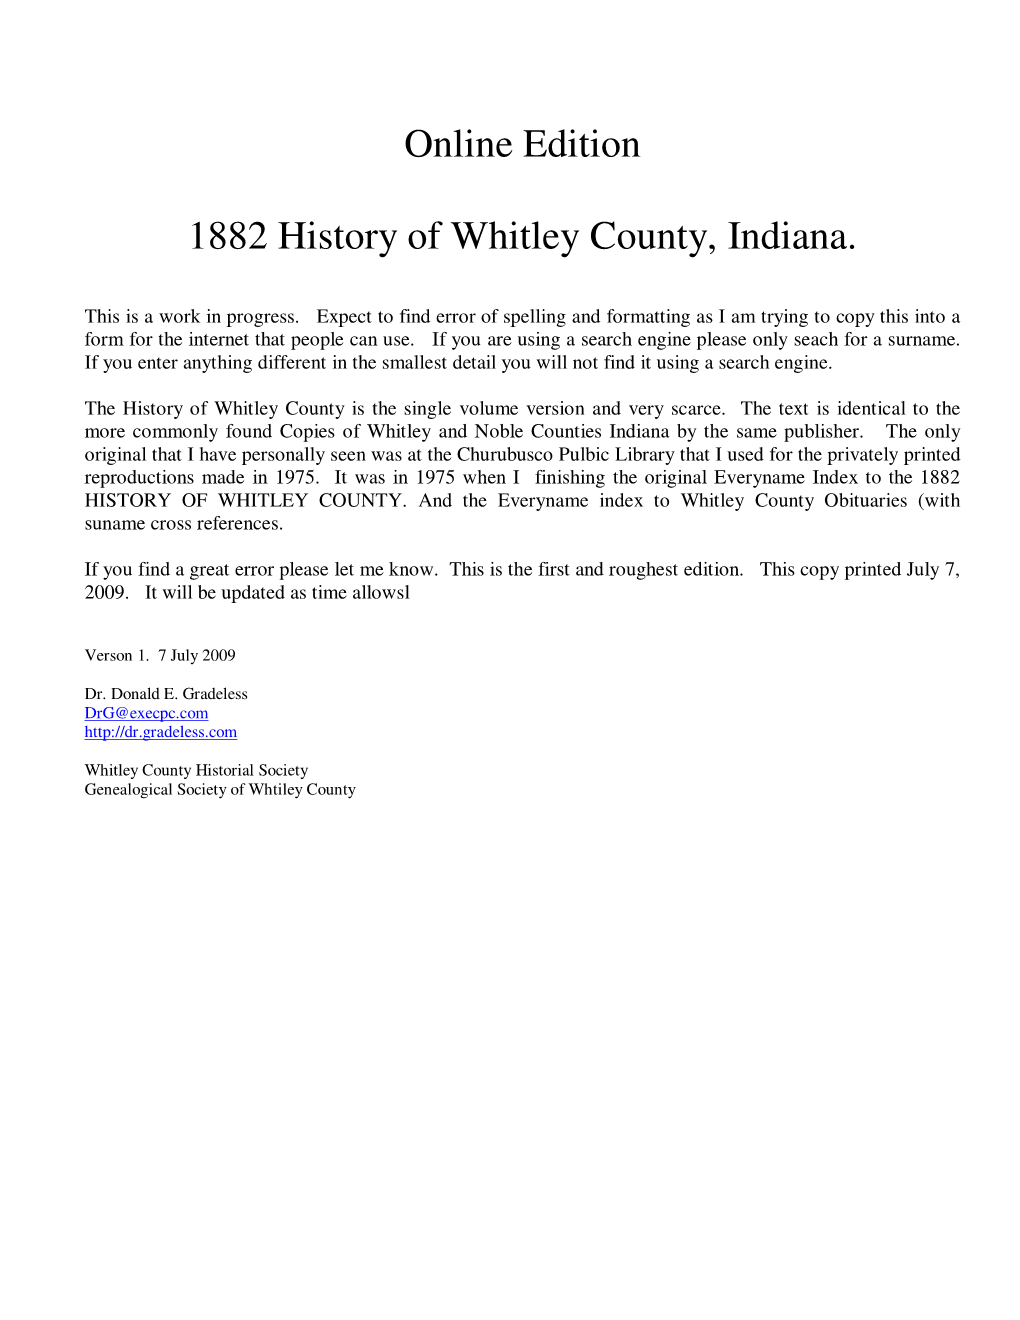 Online Edition 1882 History of Whitley County, Indiana